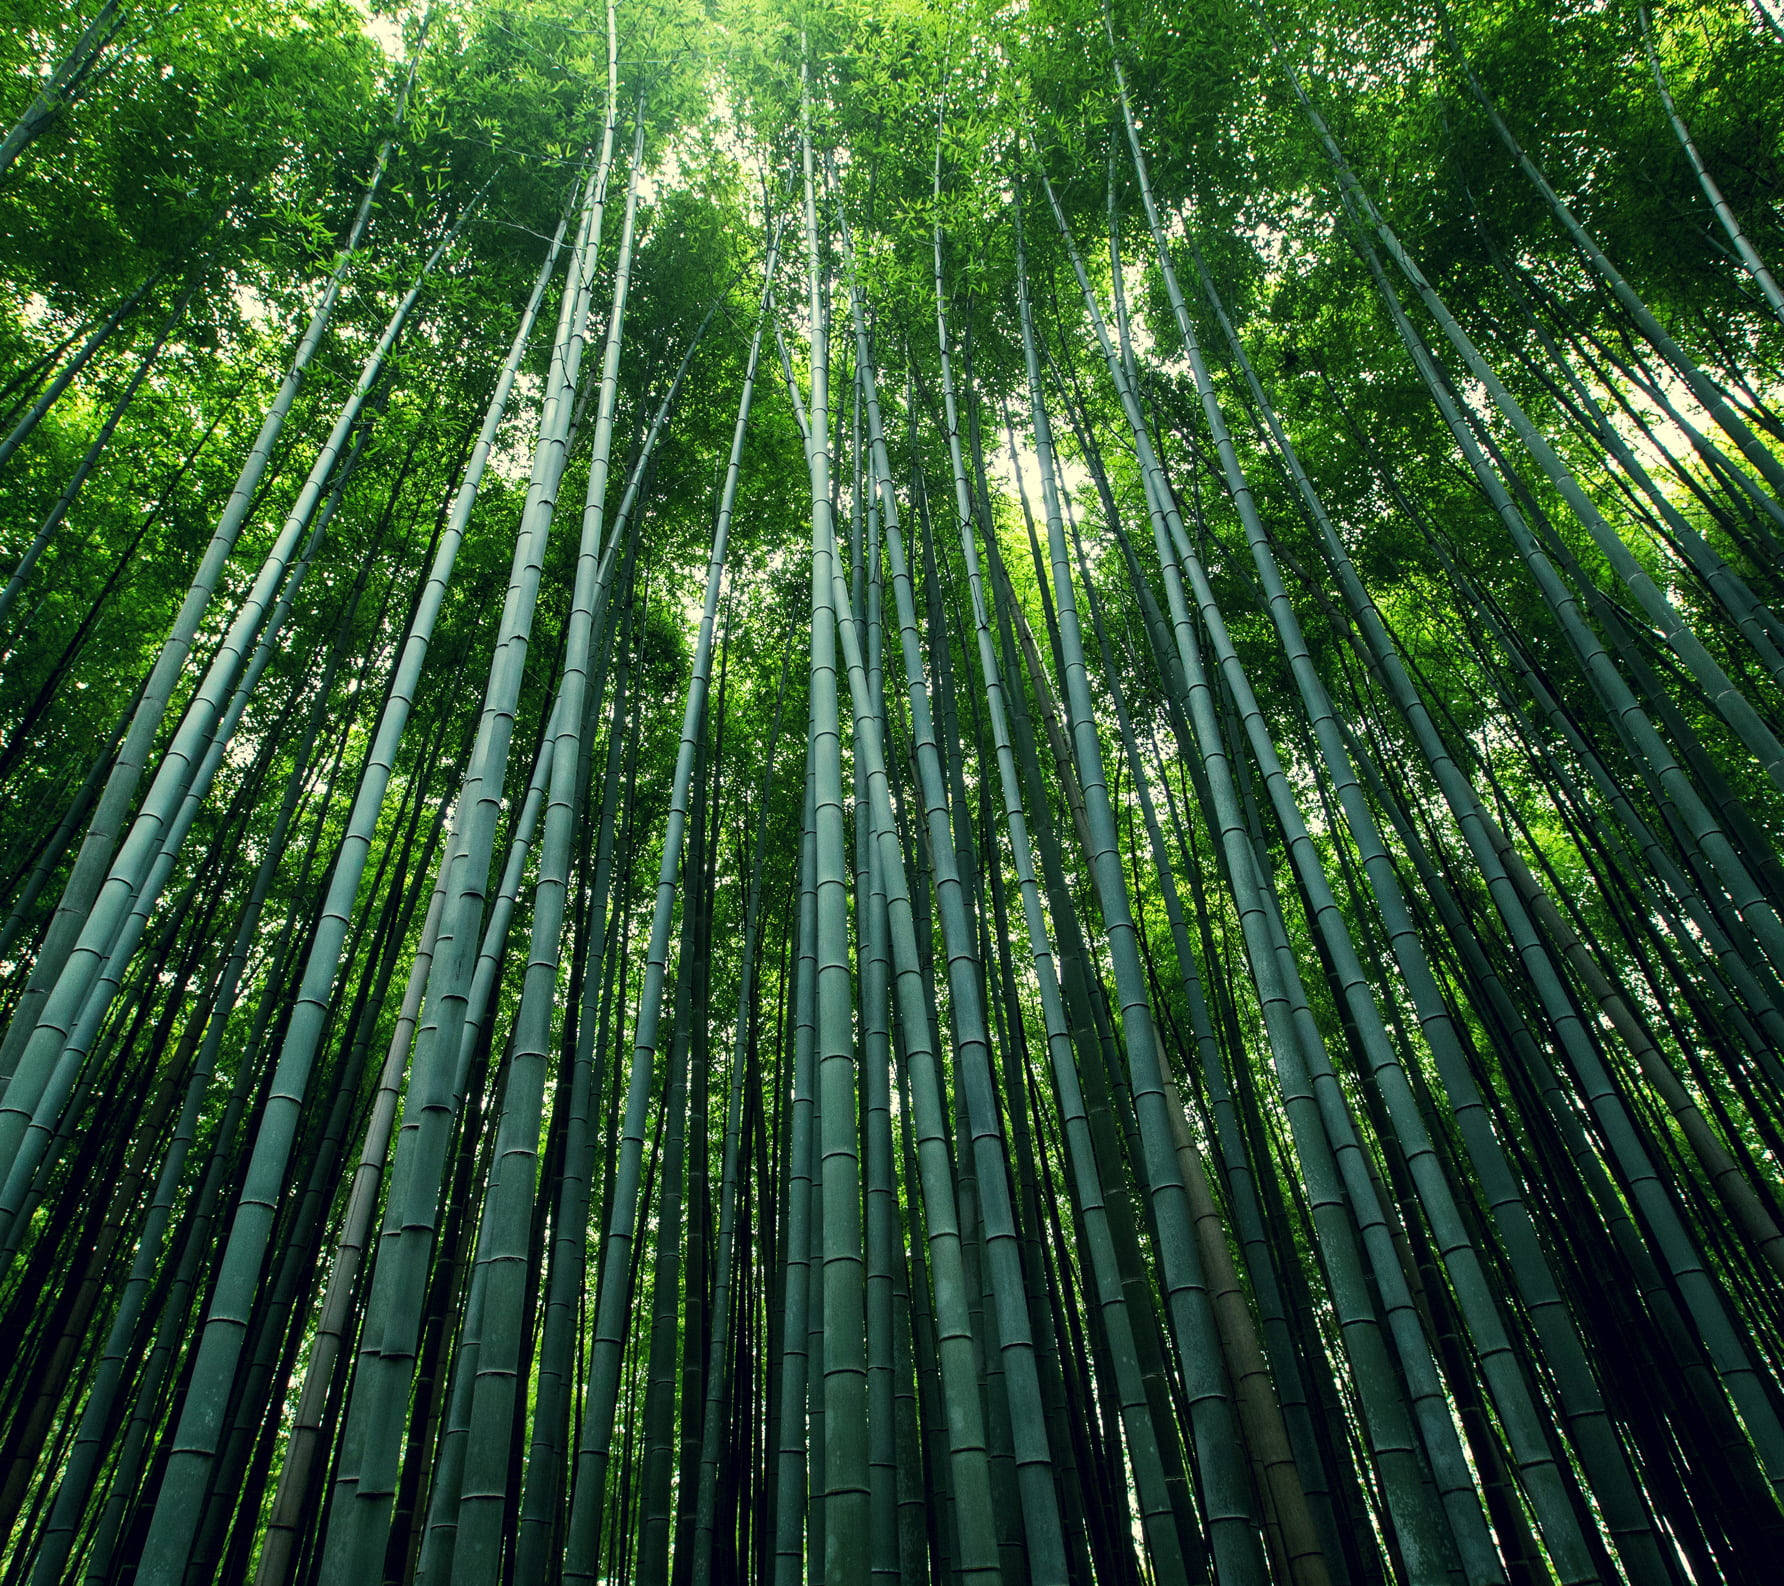 Captivating And Serene Bamboo Forest Iphone Wallpaper